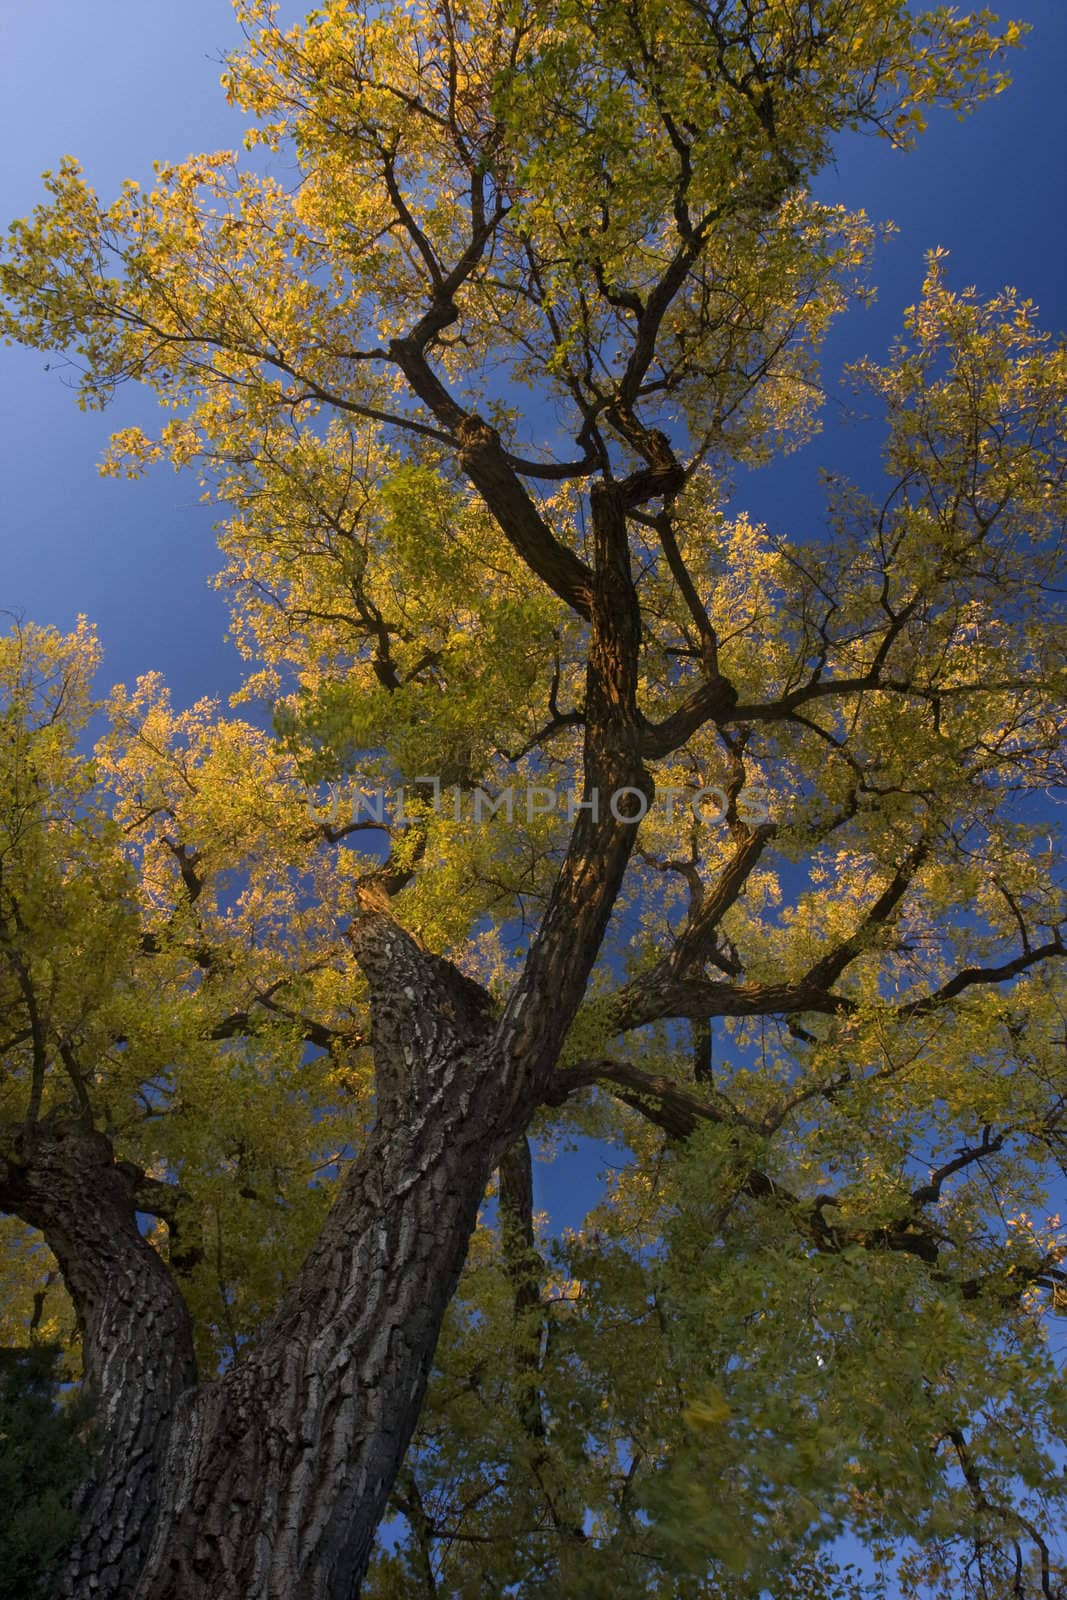 giant cottonwood tree with golden leaves looking up against blue sky, light breeze